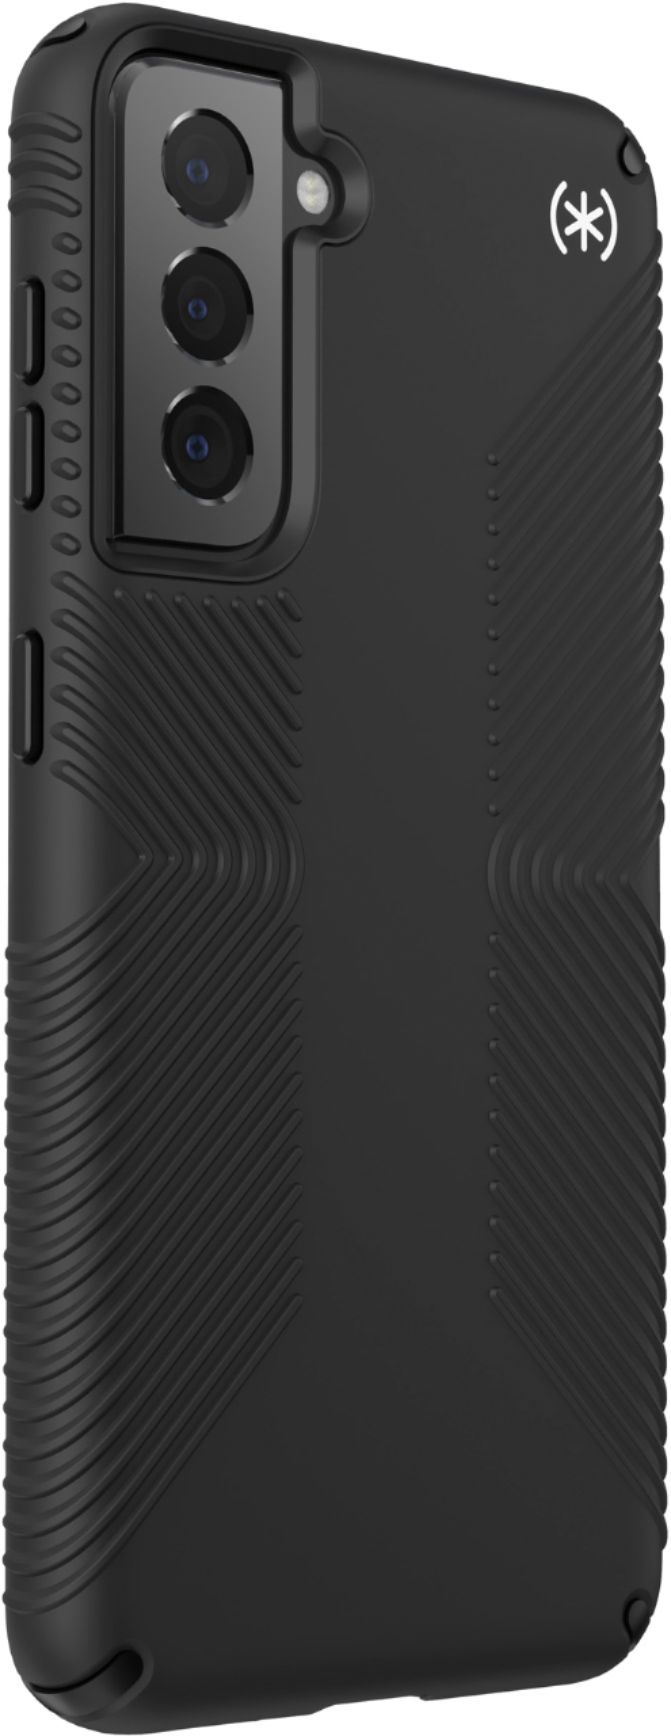 Angle View: SaharaCase - Folio Wallet Case for Samsung Galaxy S21+ 5G - Black